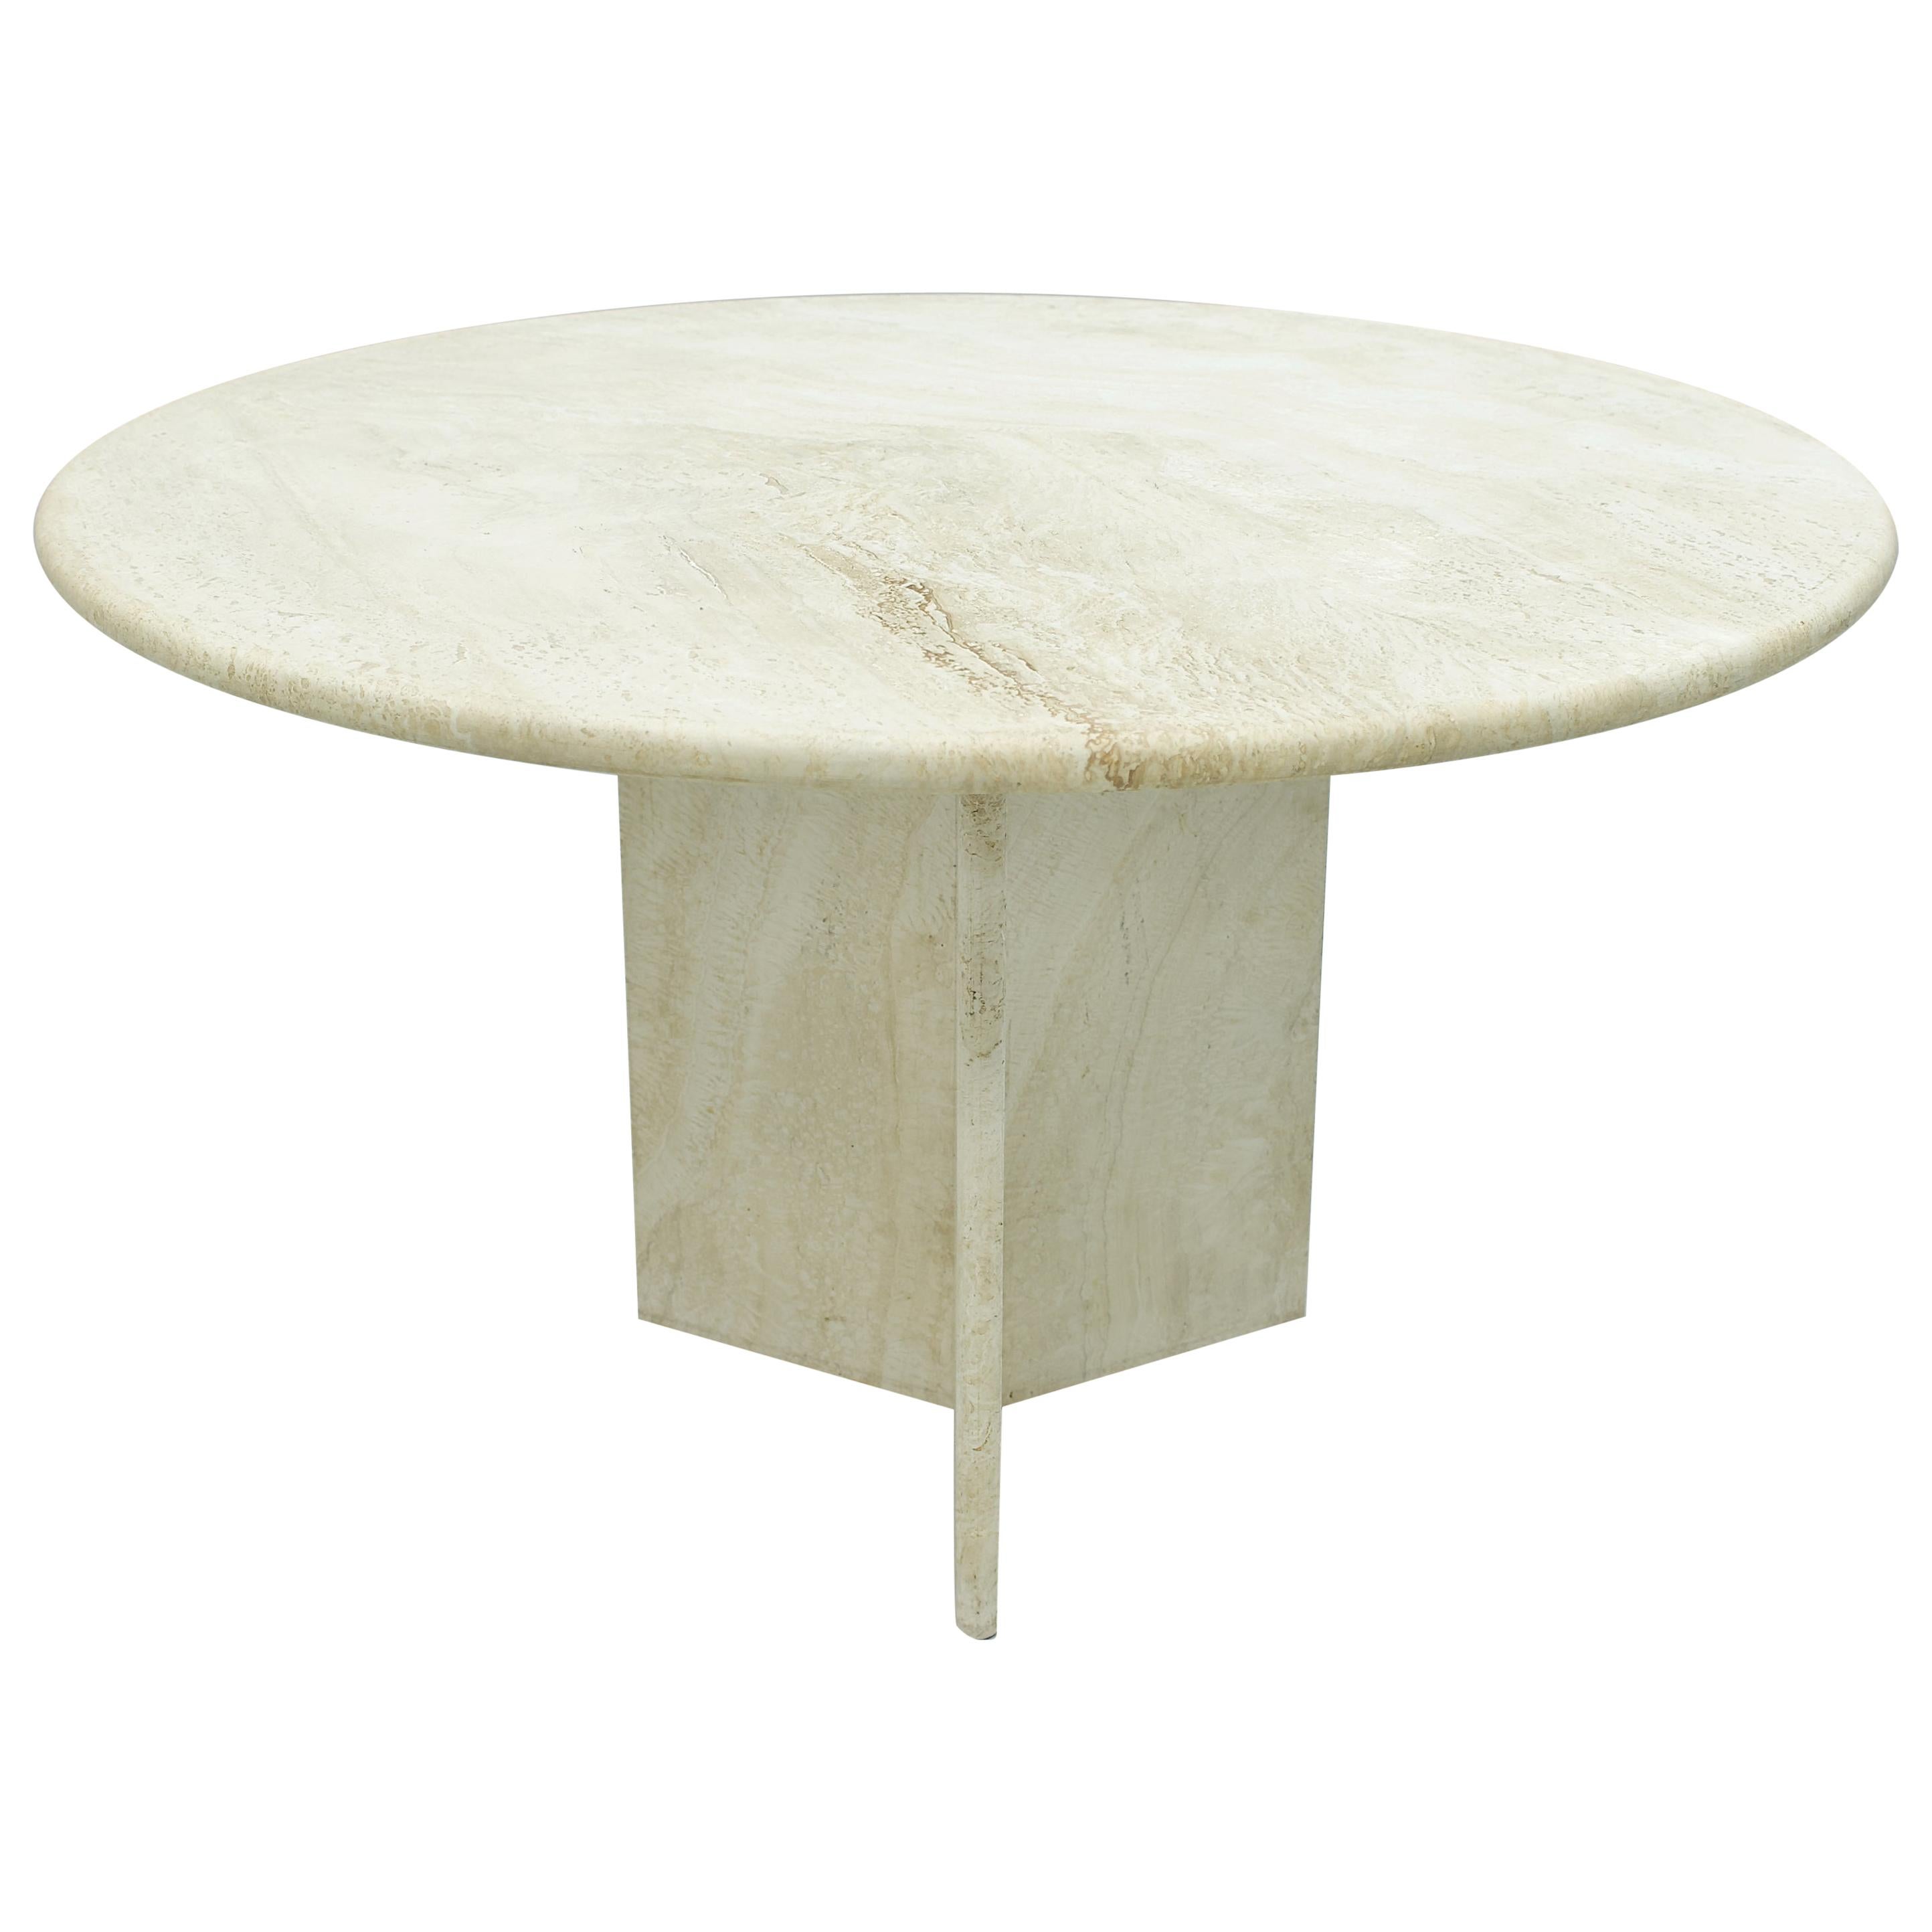 Round Travertine Dining Table, Italy, 1970s For Sale